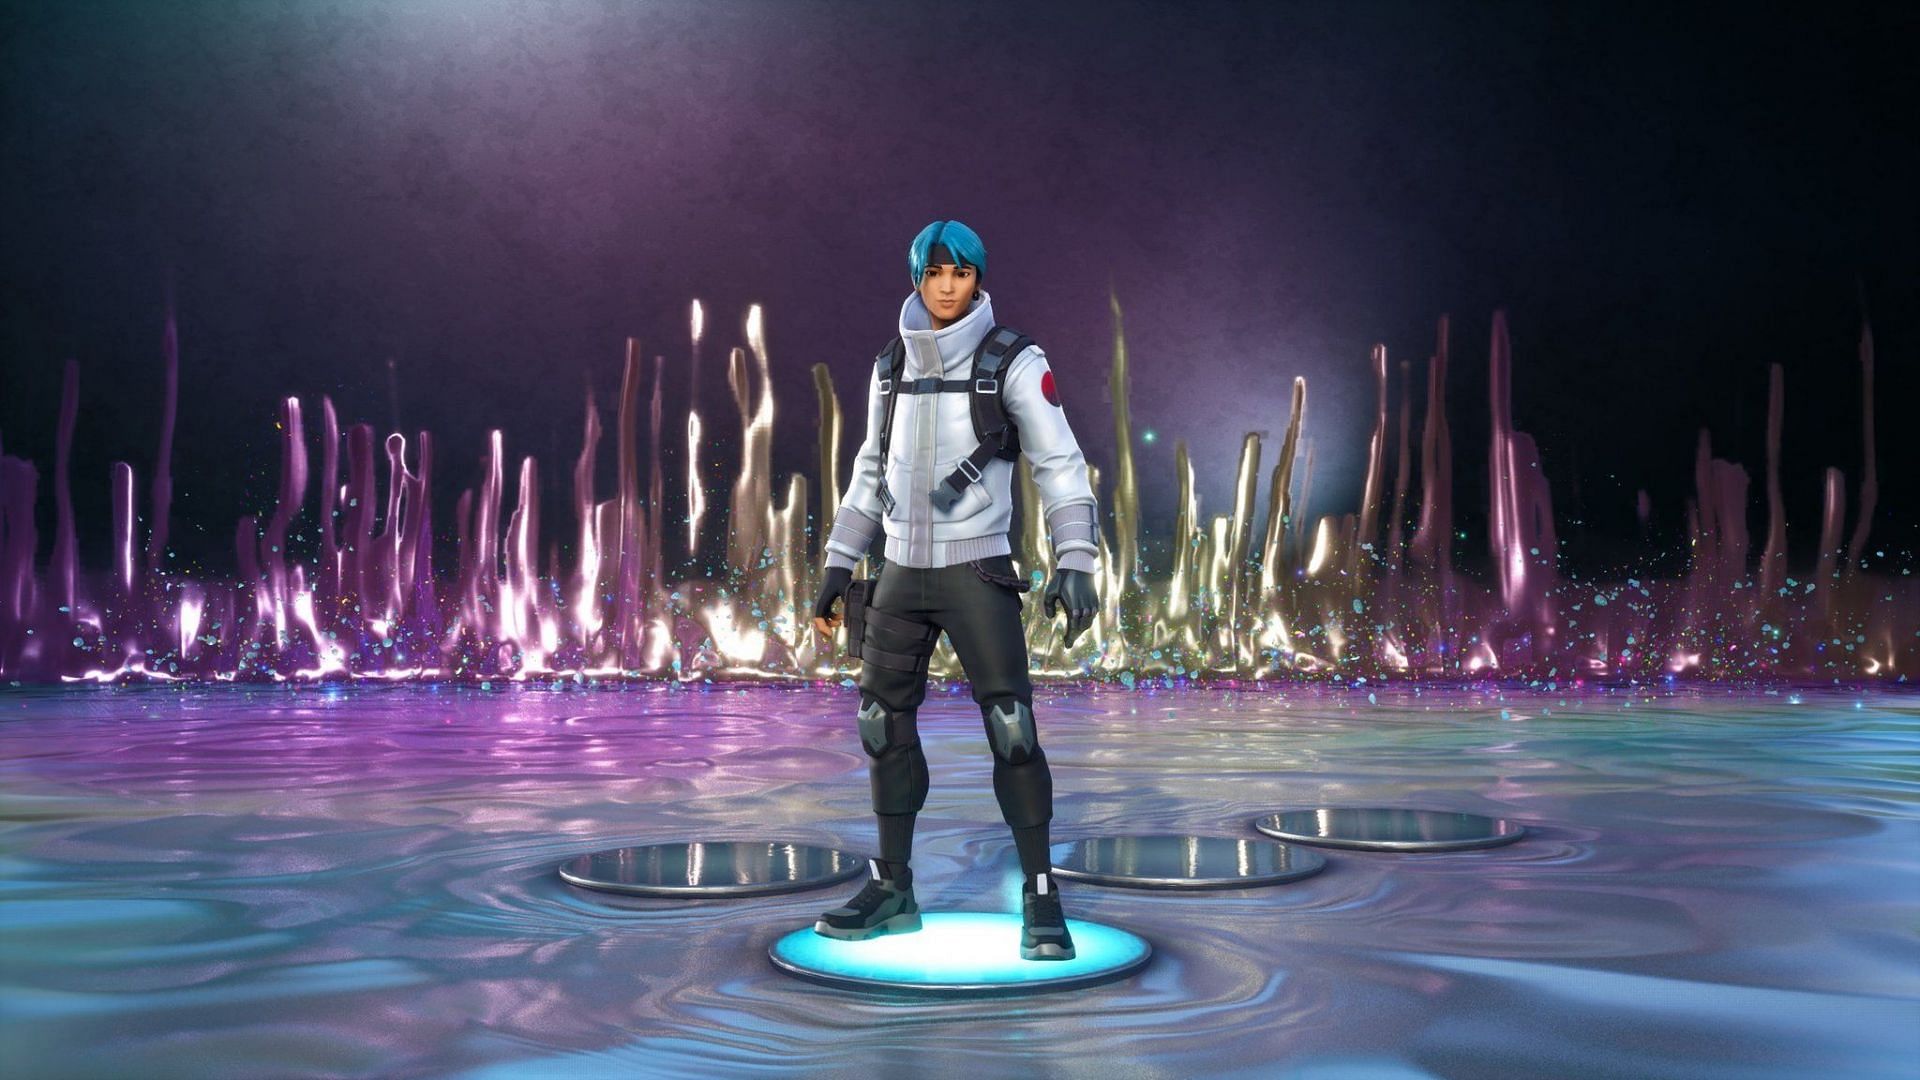 The exclusive Fortnite skin will be obtainable for a limited time (Image via Epic Games)